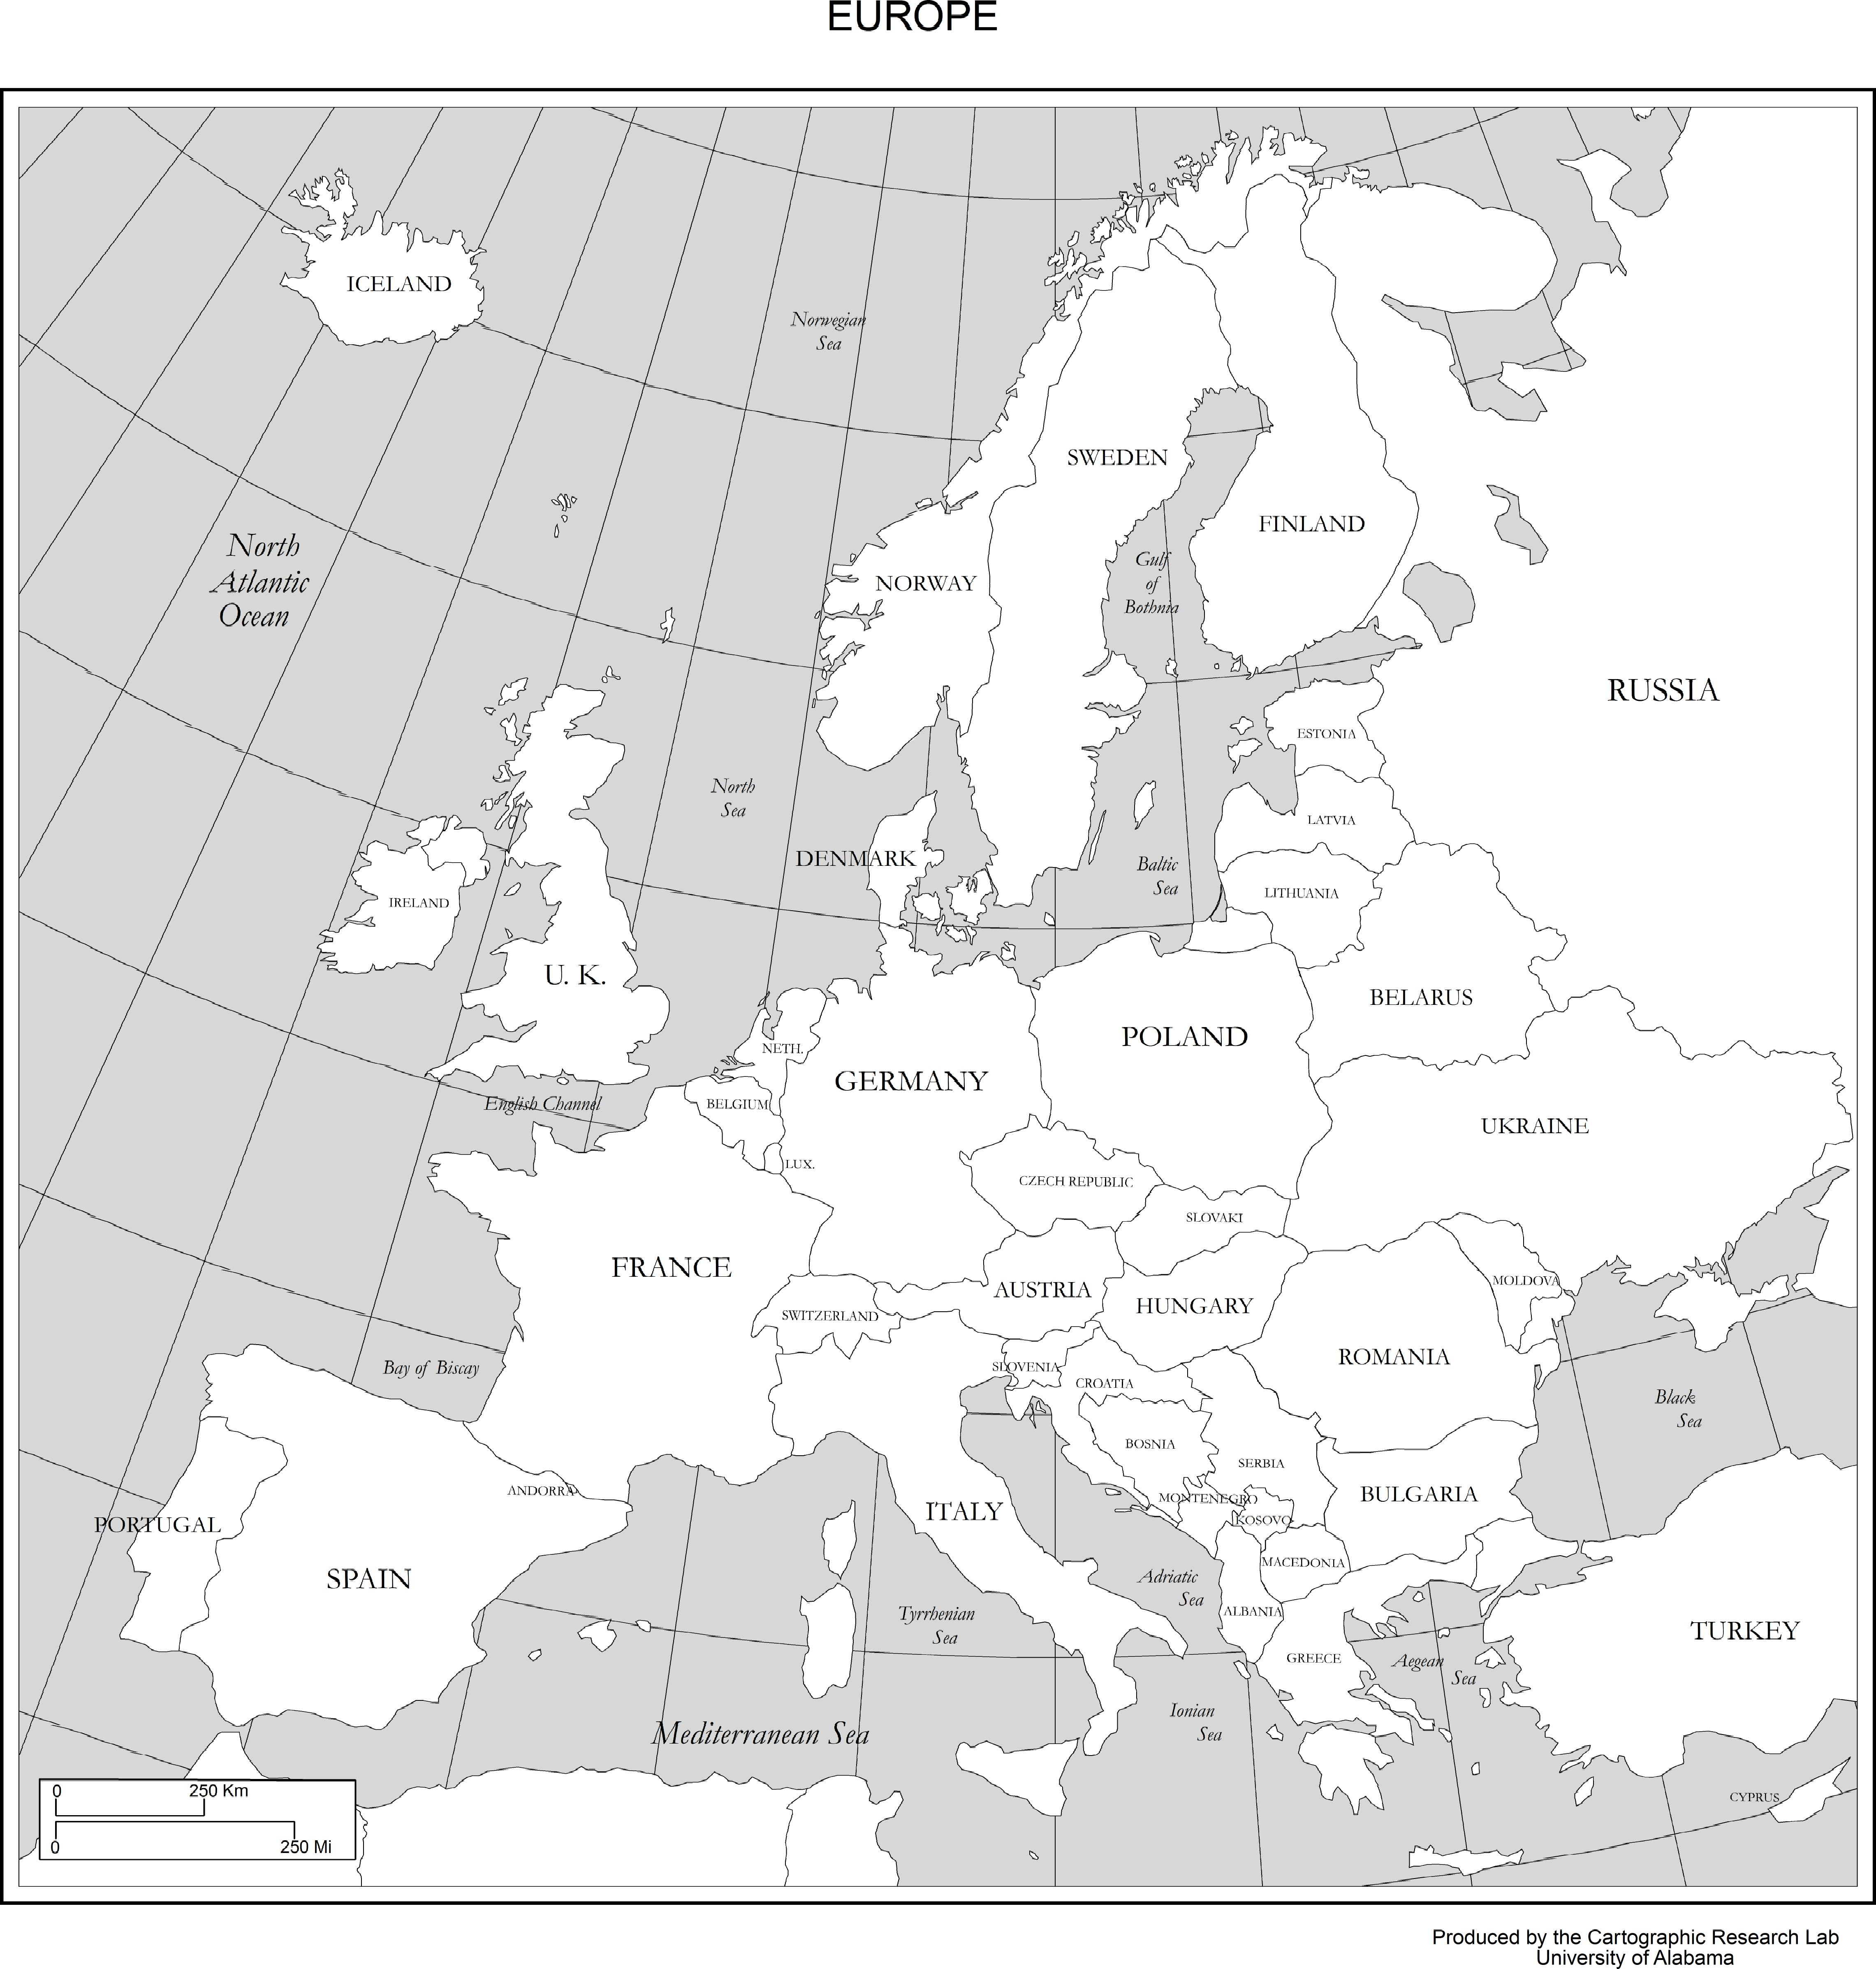 Free Printable Map Of Europe With Cities - FREE PRINTABLE TEMPLATES